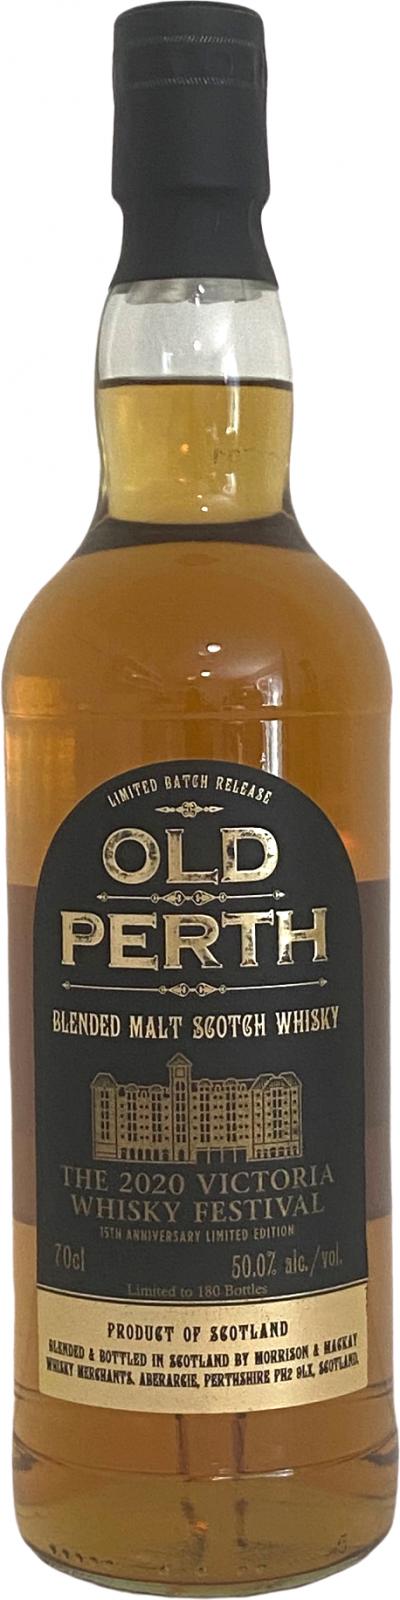 Old Perth Blended Malt Scotch Whisky MMcK Limited Batch Release ex-bourbon and ex-sherry 50% 700ml